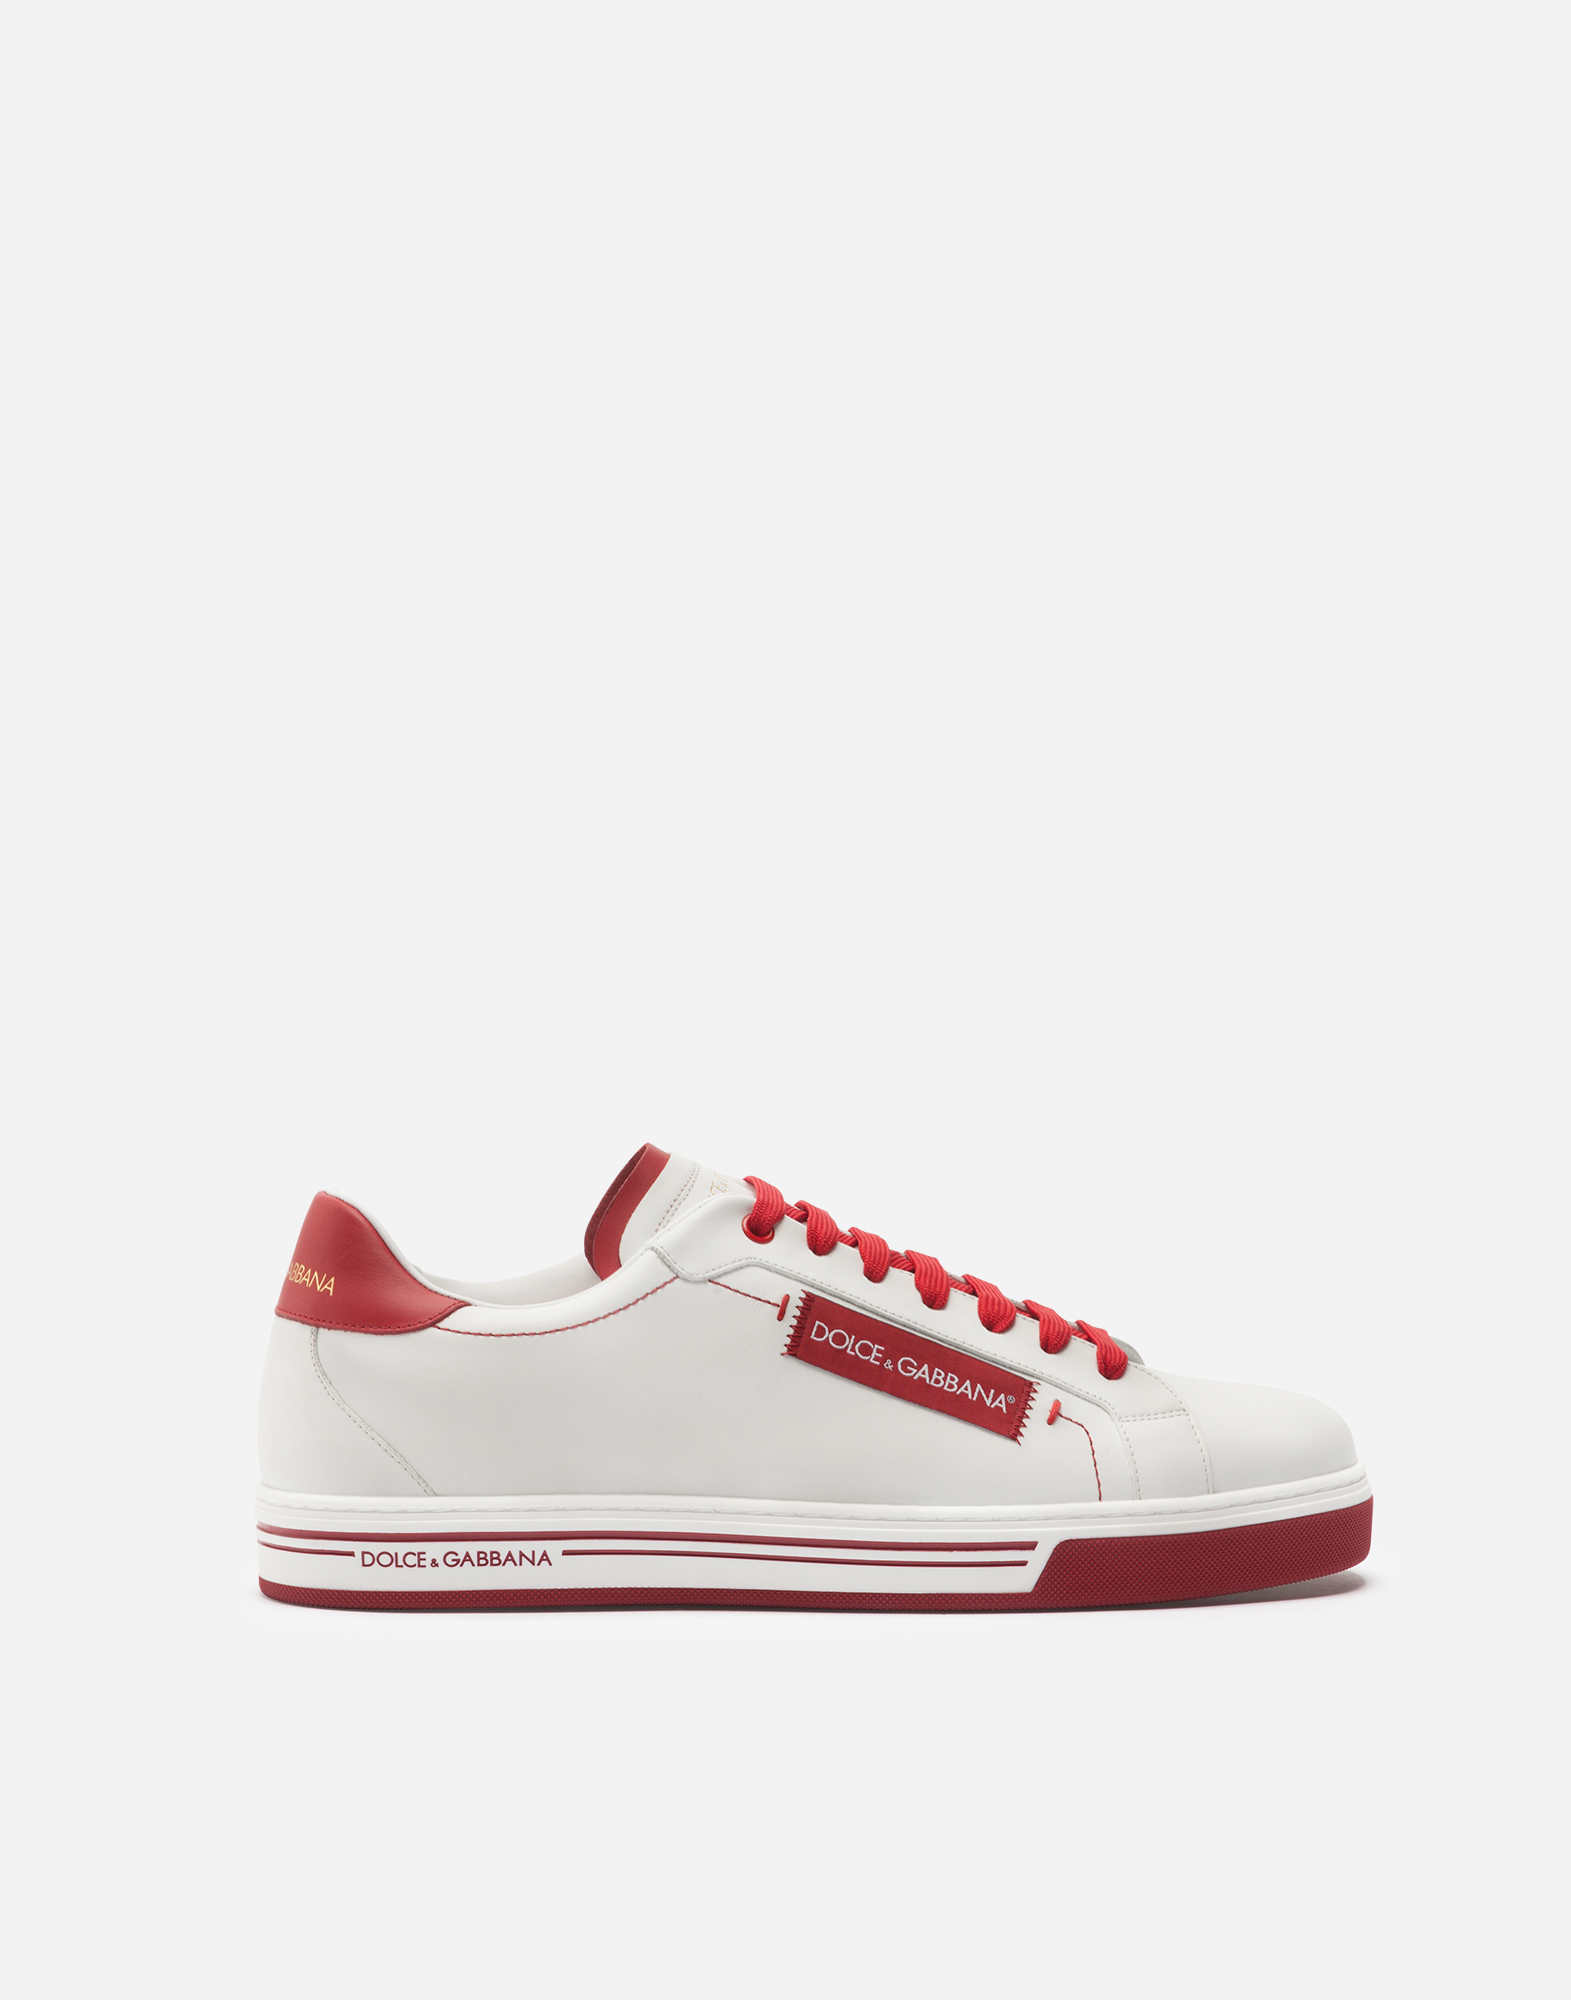 dolce and gabbana dna sneakers